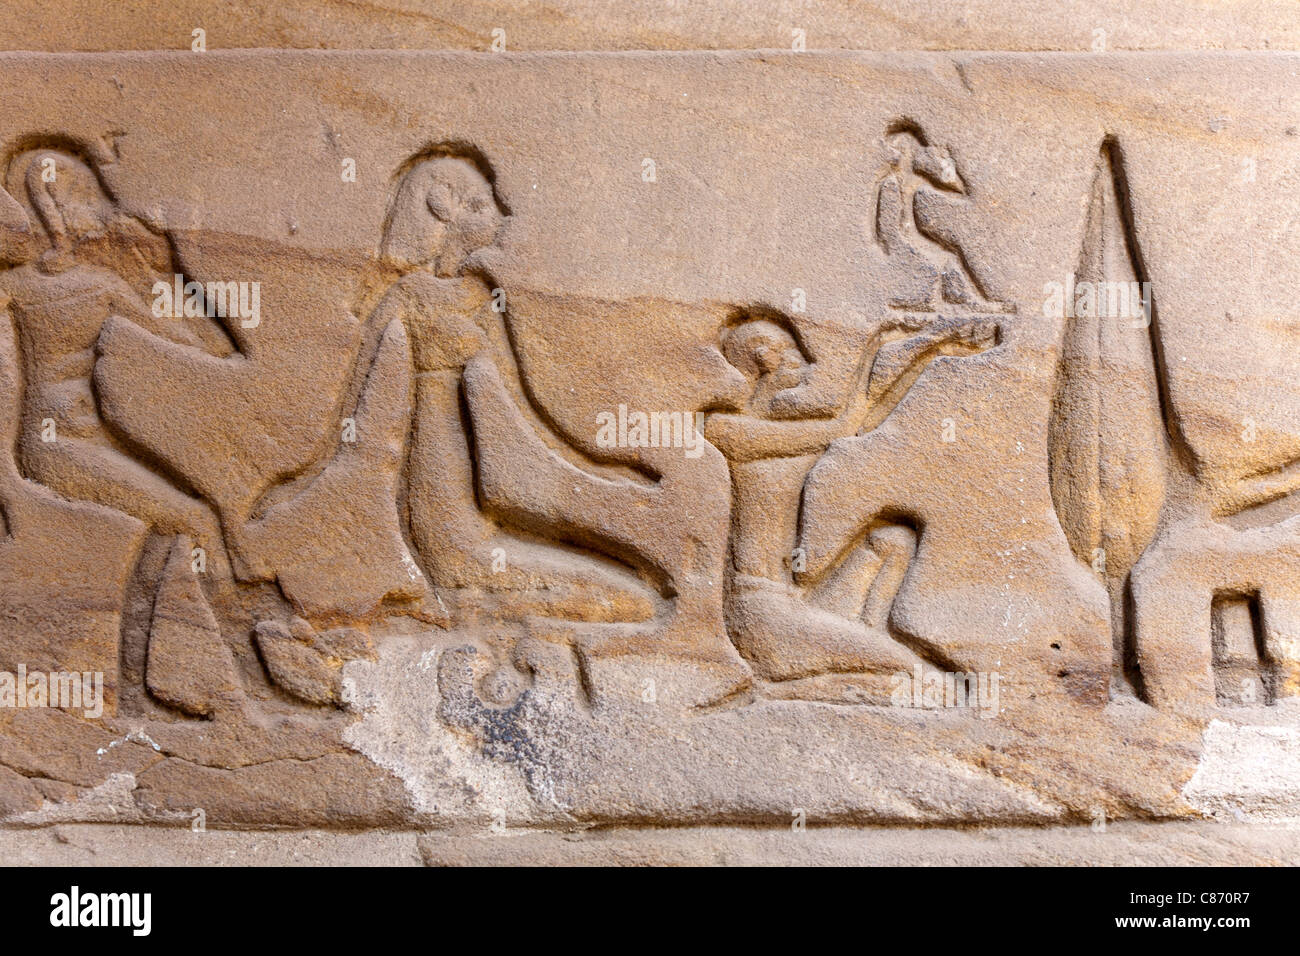 Birthing scene, creation relief within the Hypostyle Hall at the Ptolemaic Roman Temple Of Khnum at Esna, Egypt Stock Photo